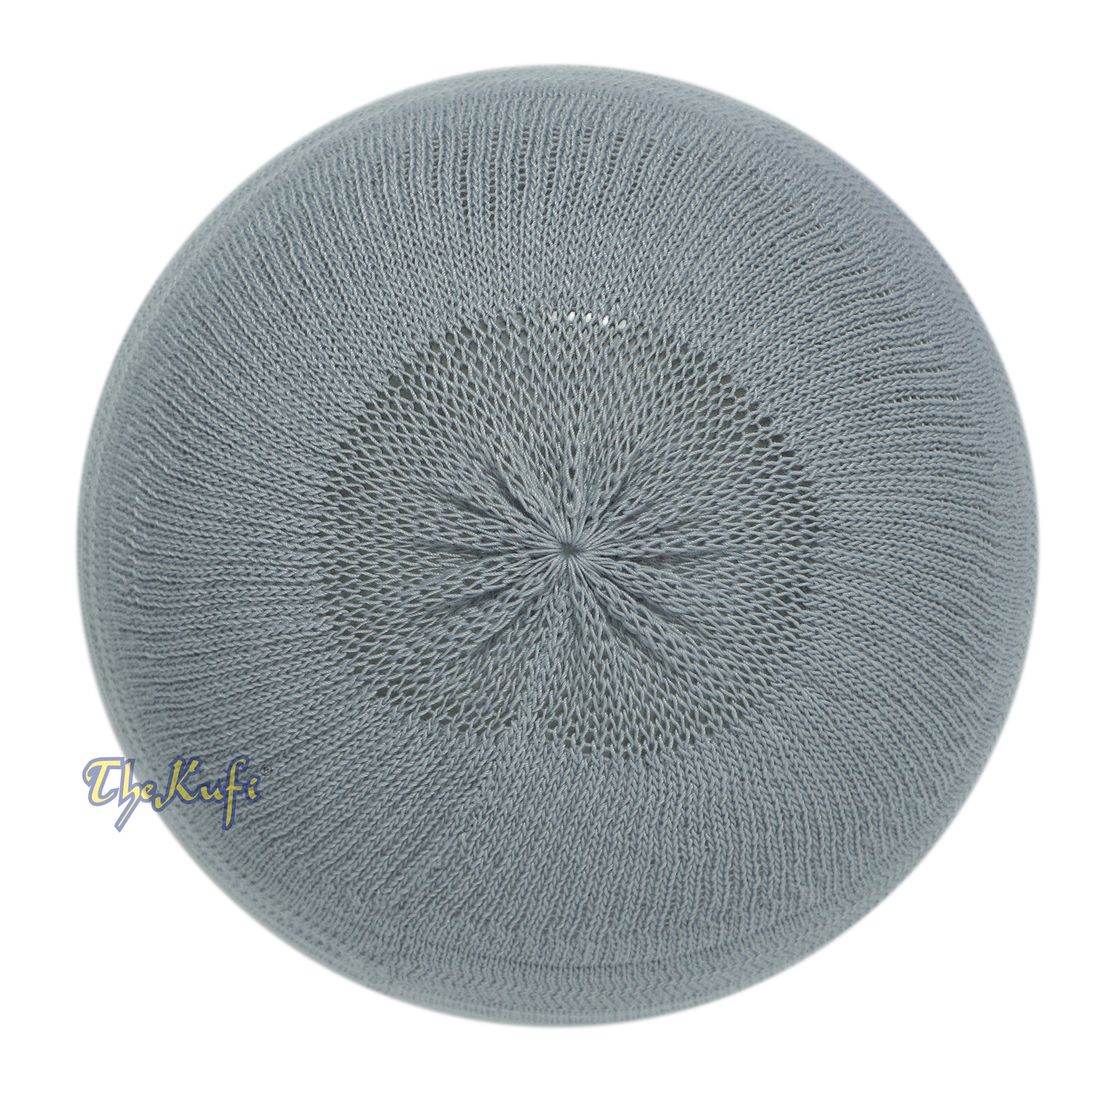 Gray Cotton stretch-Knit Material Kufi Hat Comfortable Skull Cap